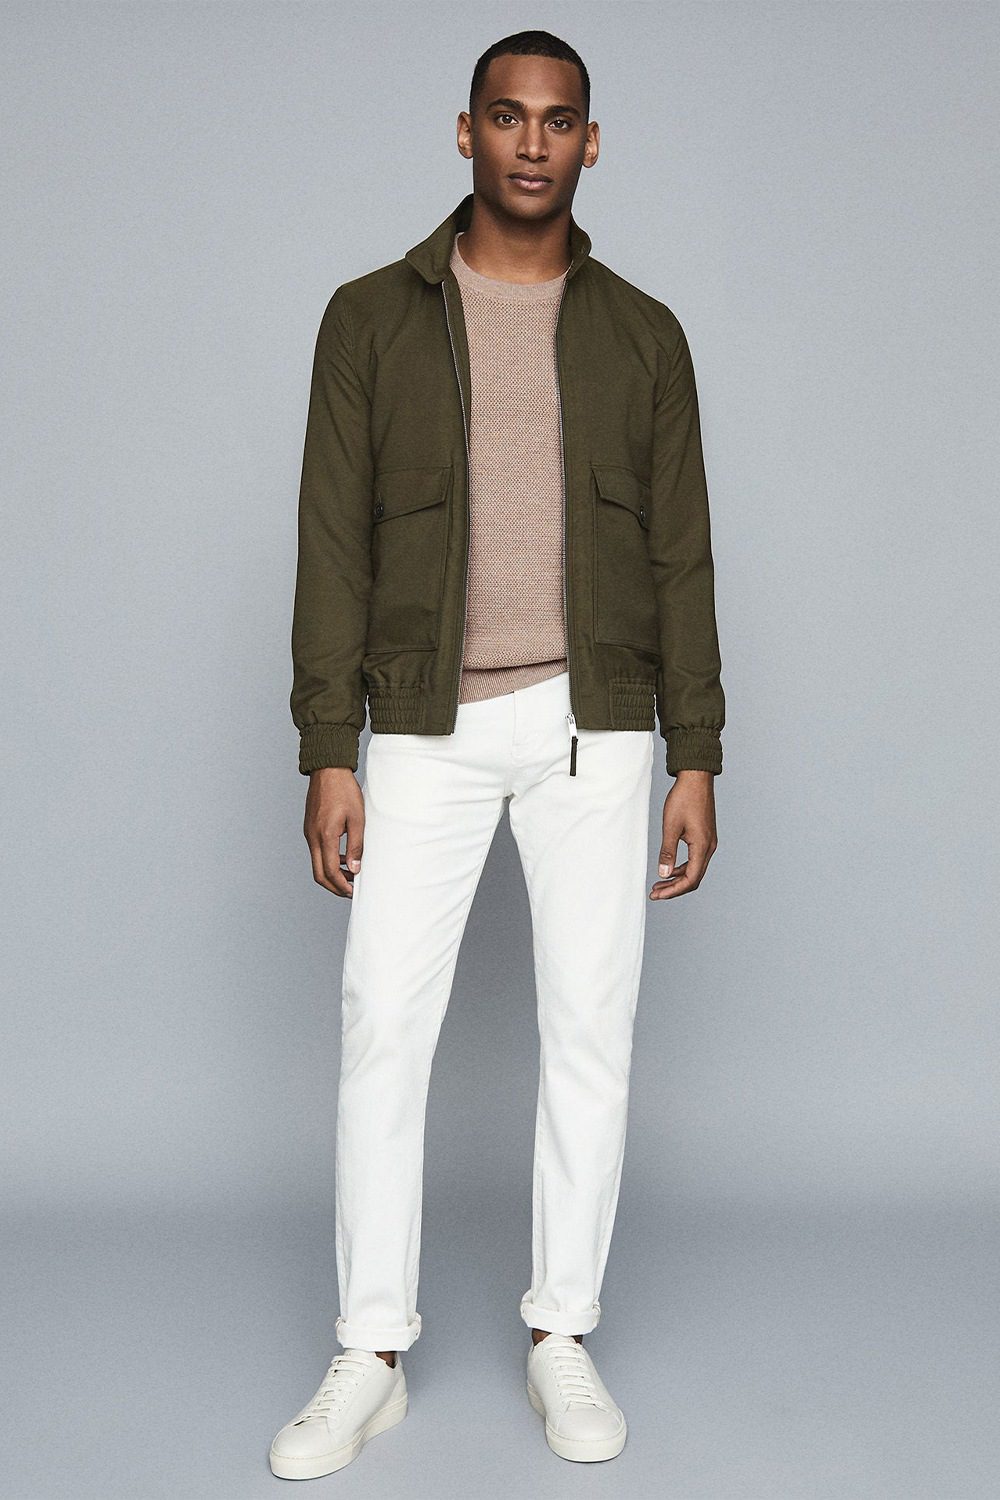 What You Should Wear With White Jeans: 7 Easy Outfits For Men